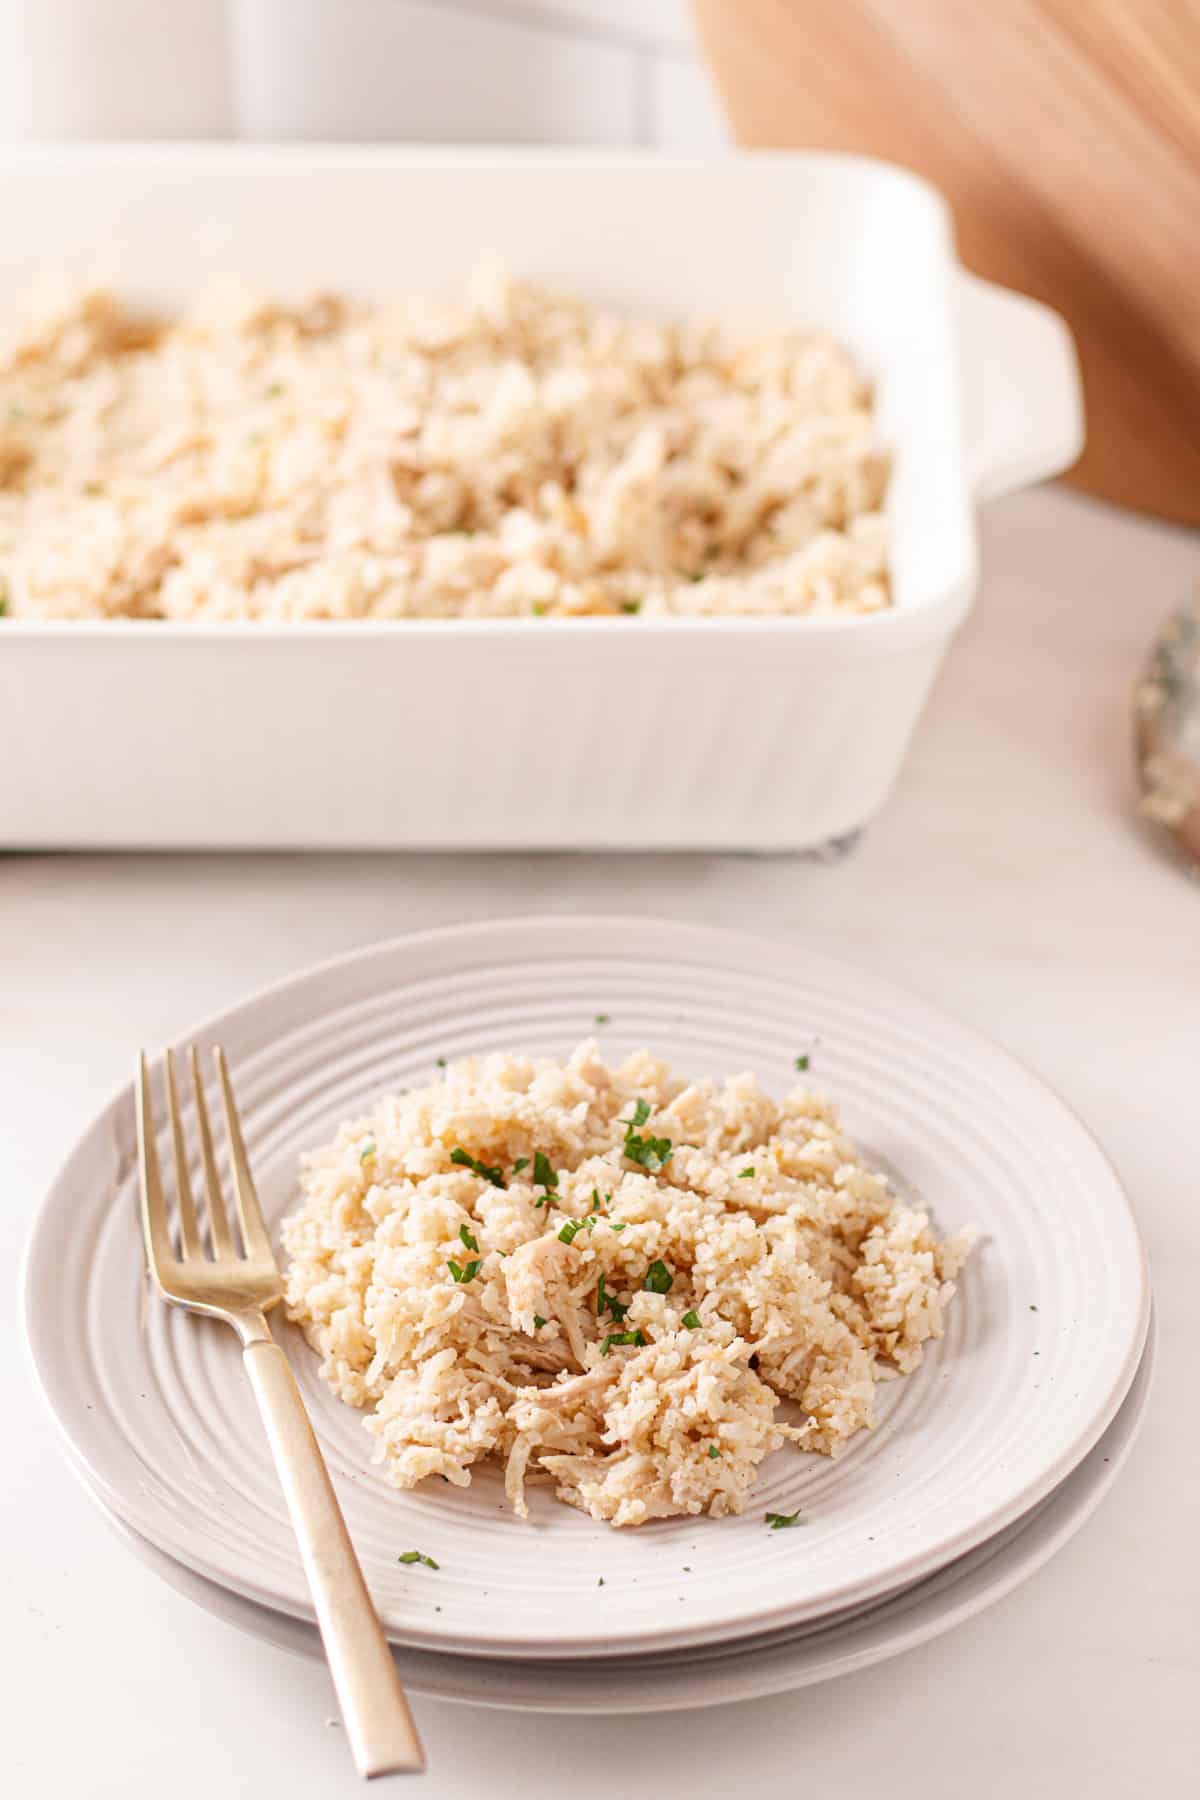 Dairy-free chicken and rice casserole on a white plate.